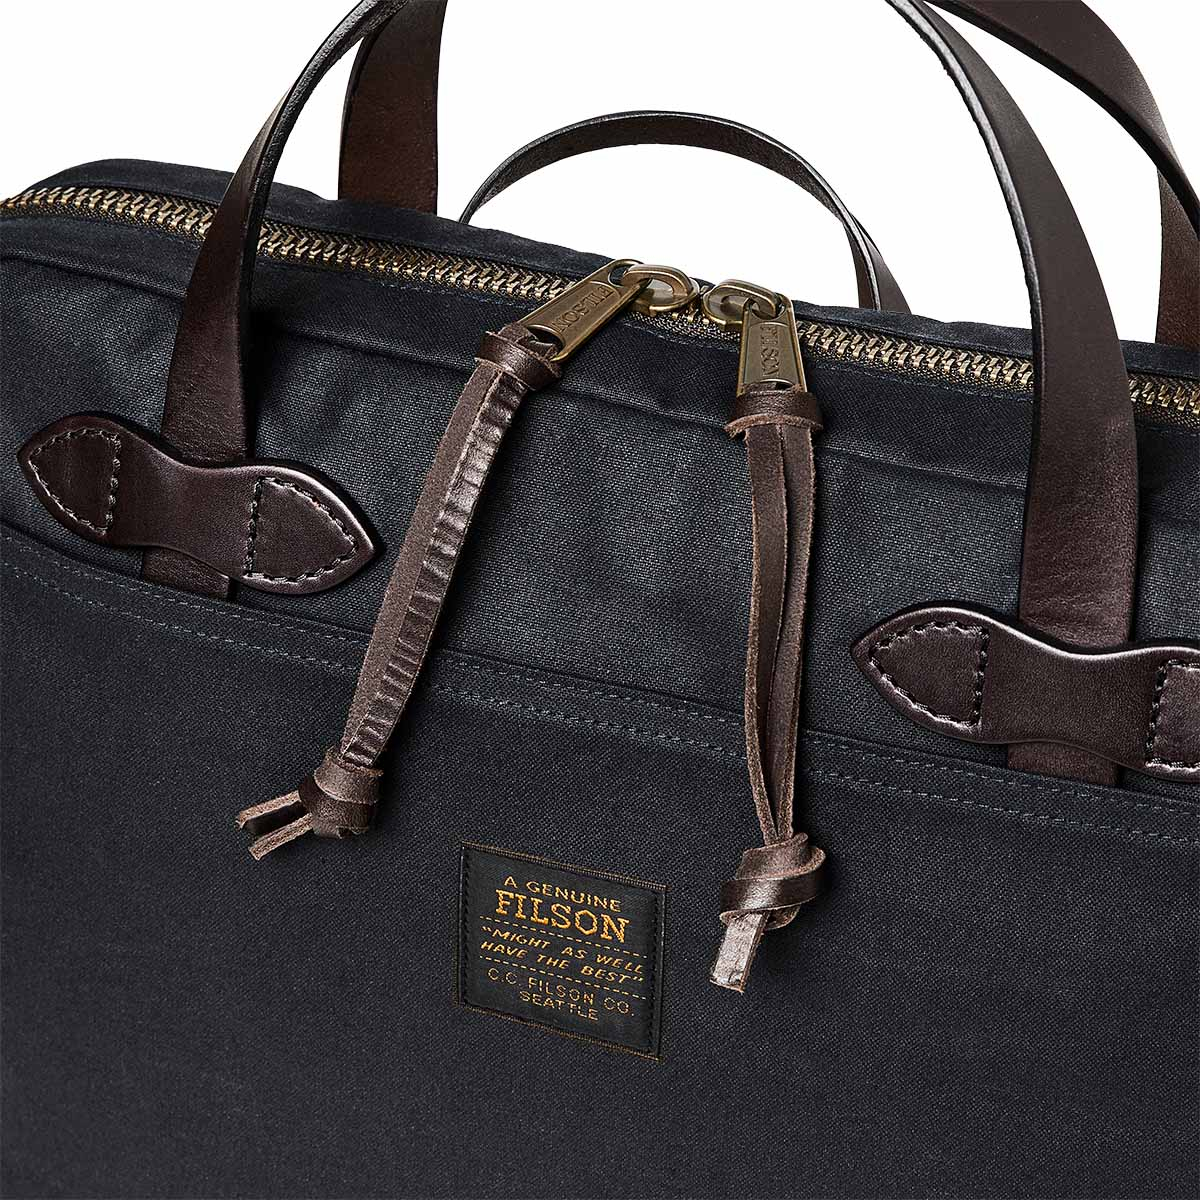 Filson Tin Cloth Compact Briefcase Navy, perfect bag for a business trip